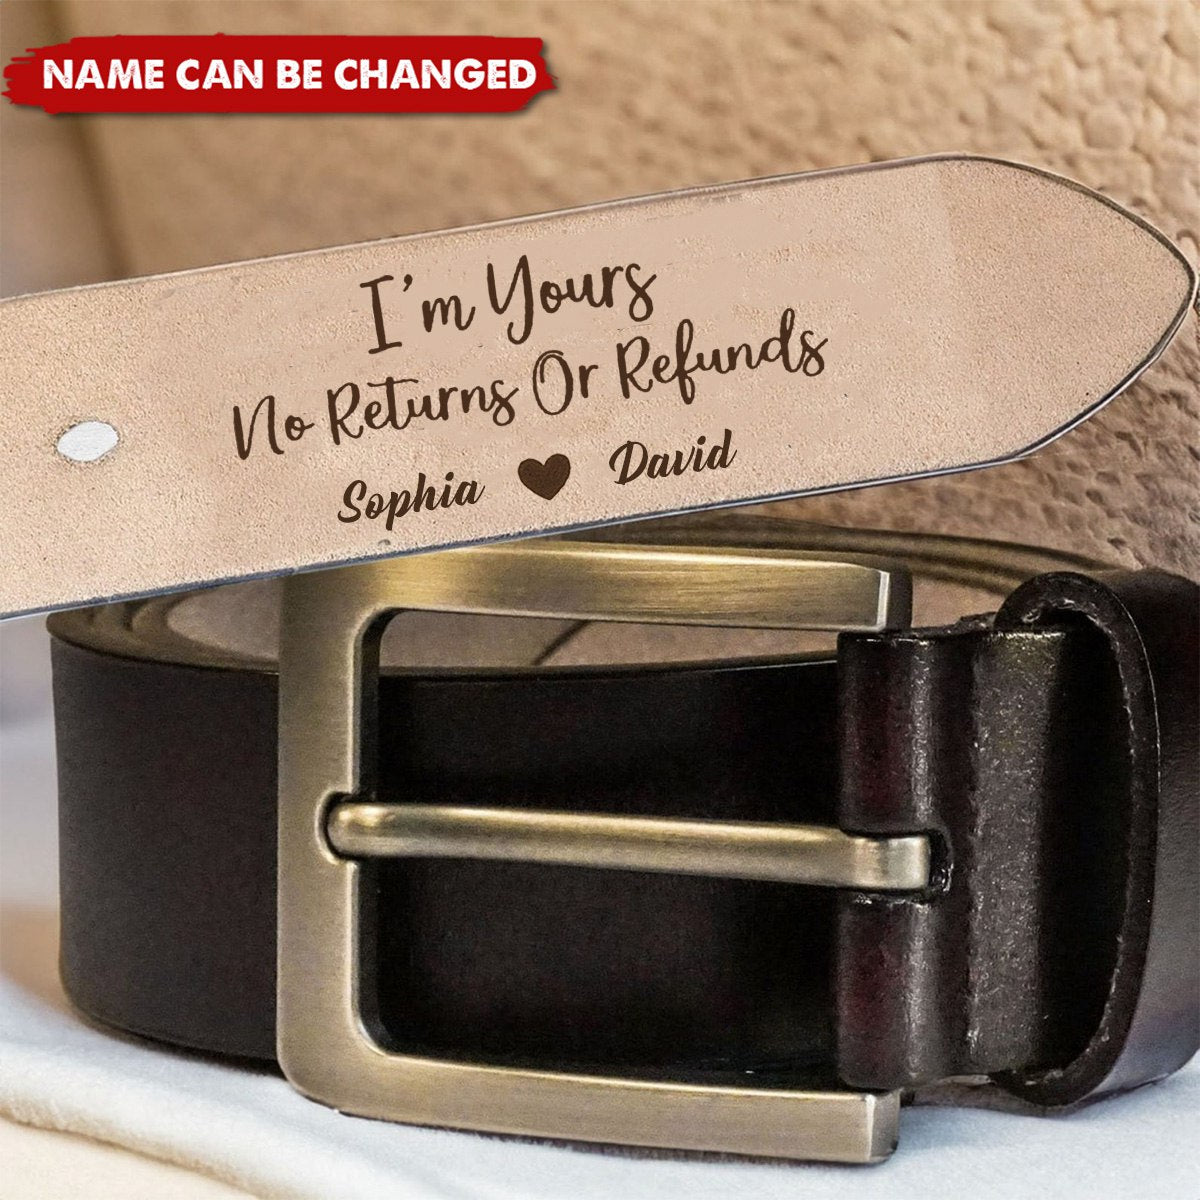 I'm Yours No Returns Or Refunds - Personalized Engraved Leather Belt